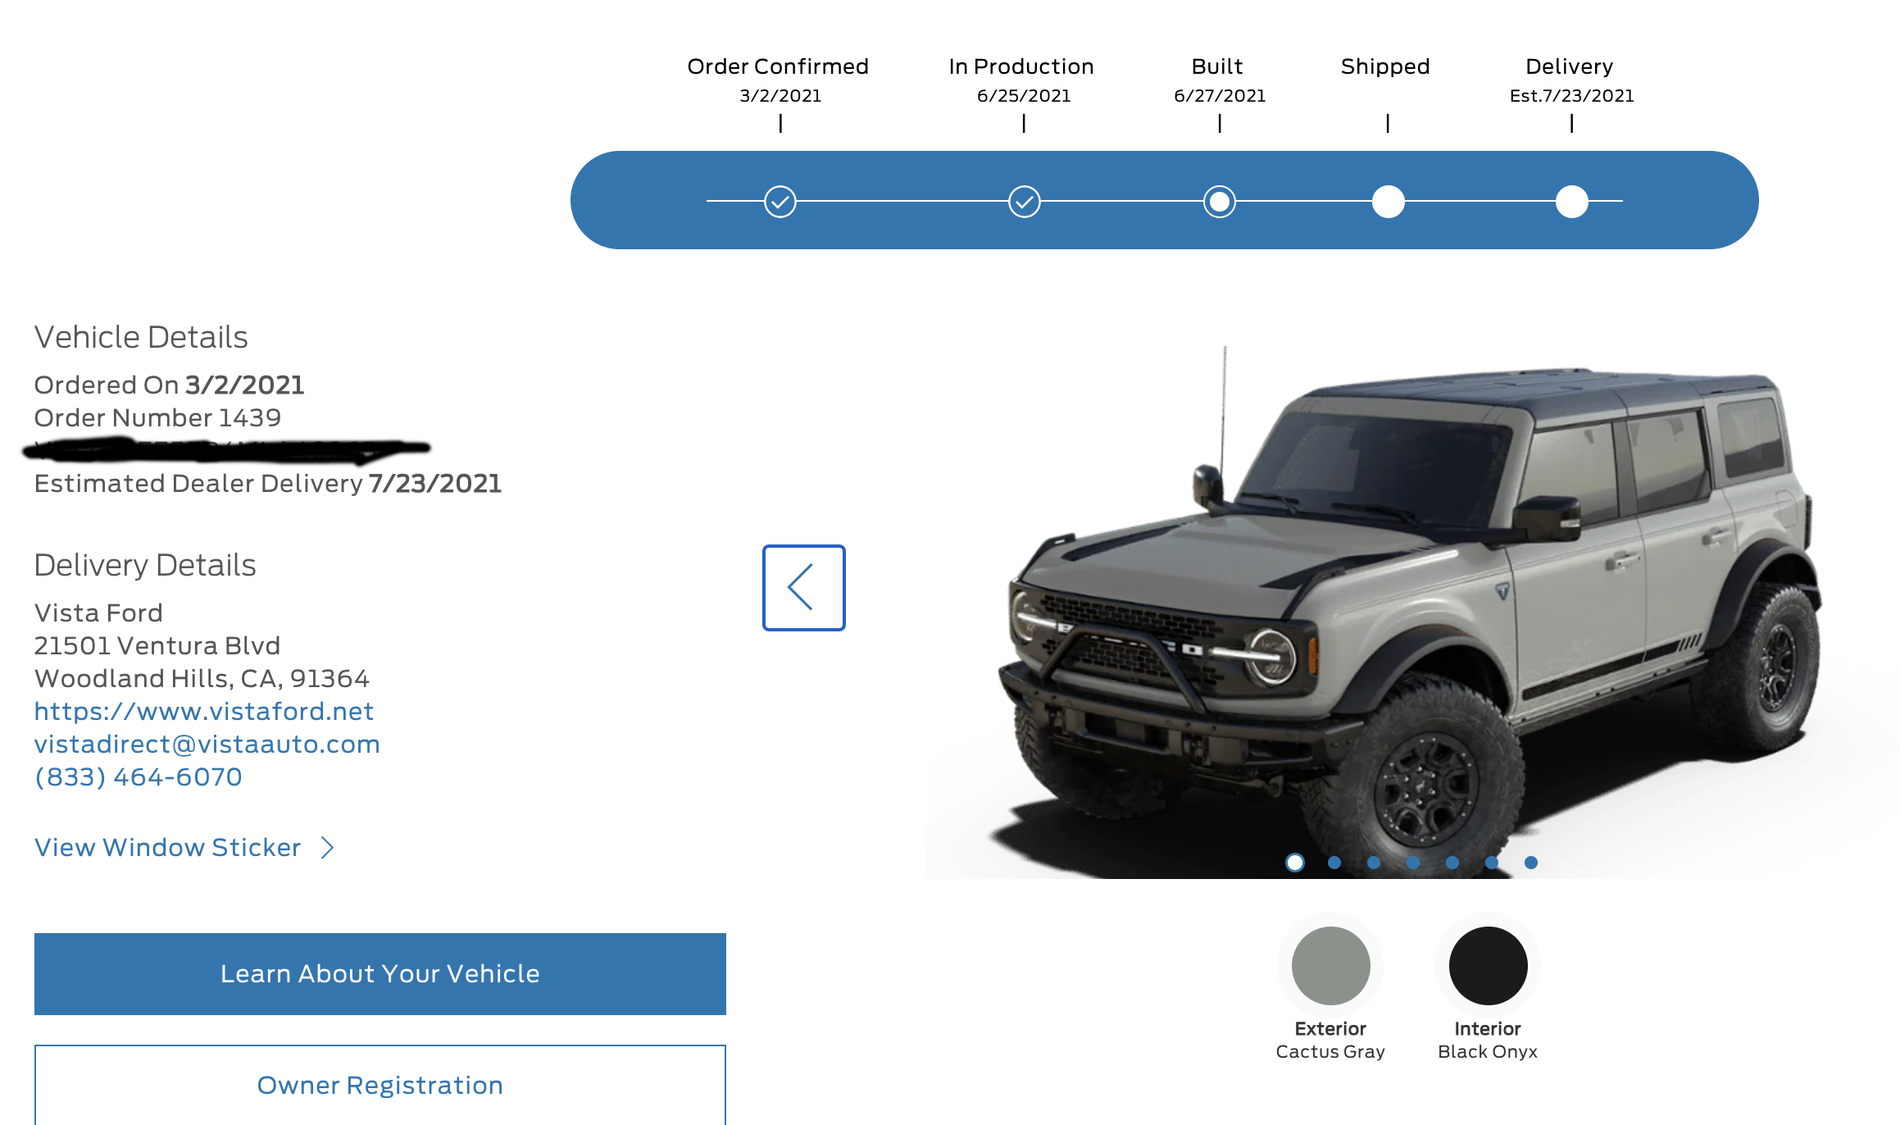 Ford Bronco “Your Bronco Has Been Built” Status Thread! 🤩 Screen Shot 2021-06-27 at 6.34.54 AM